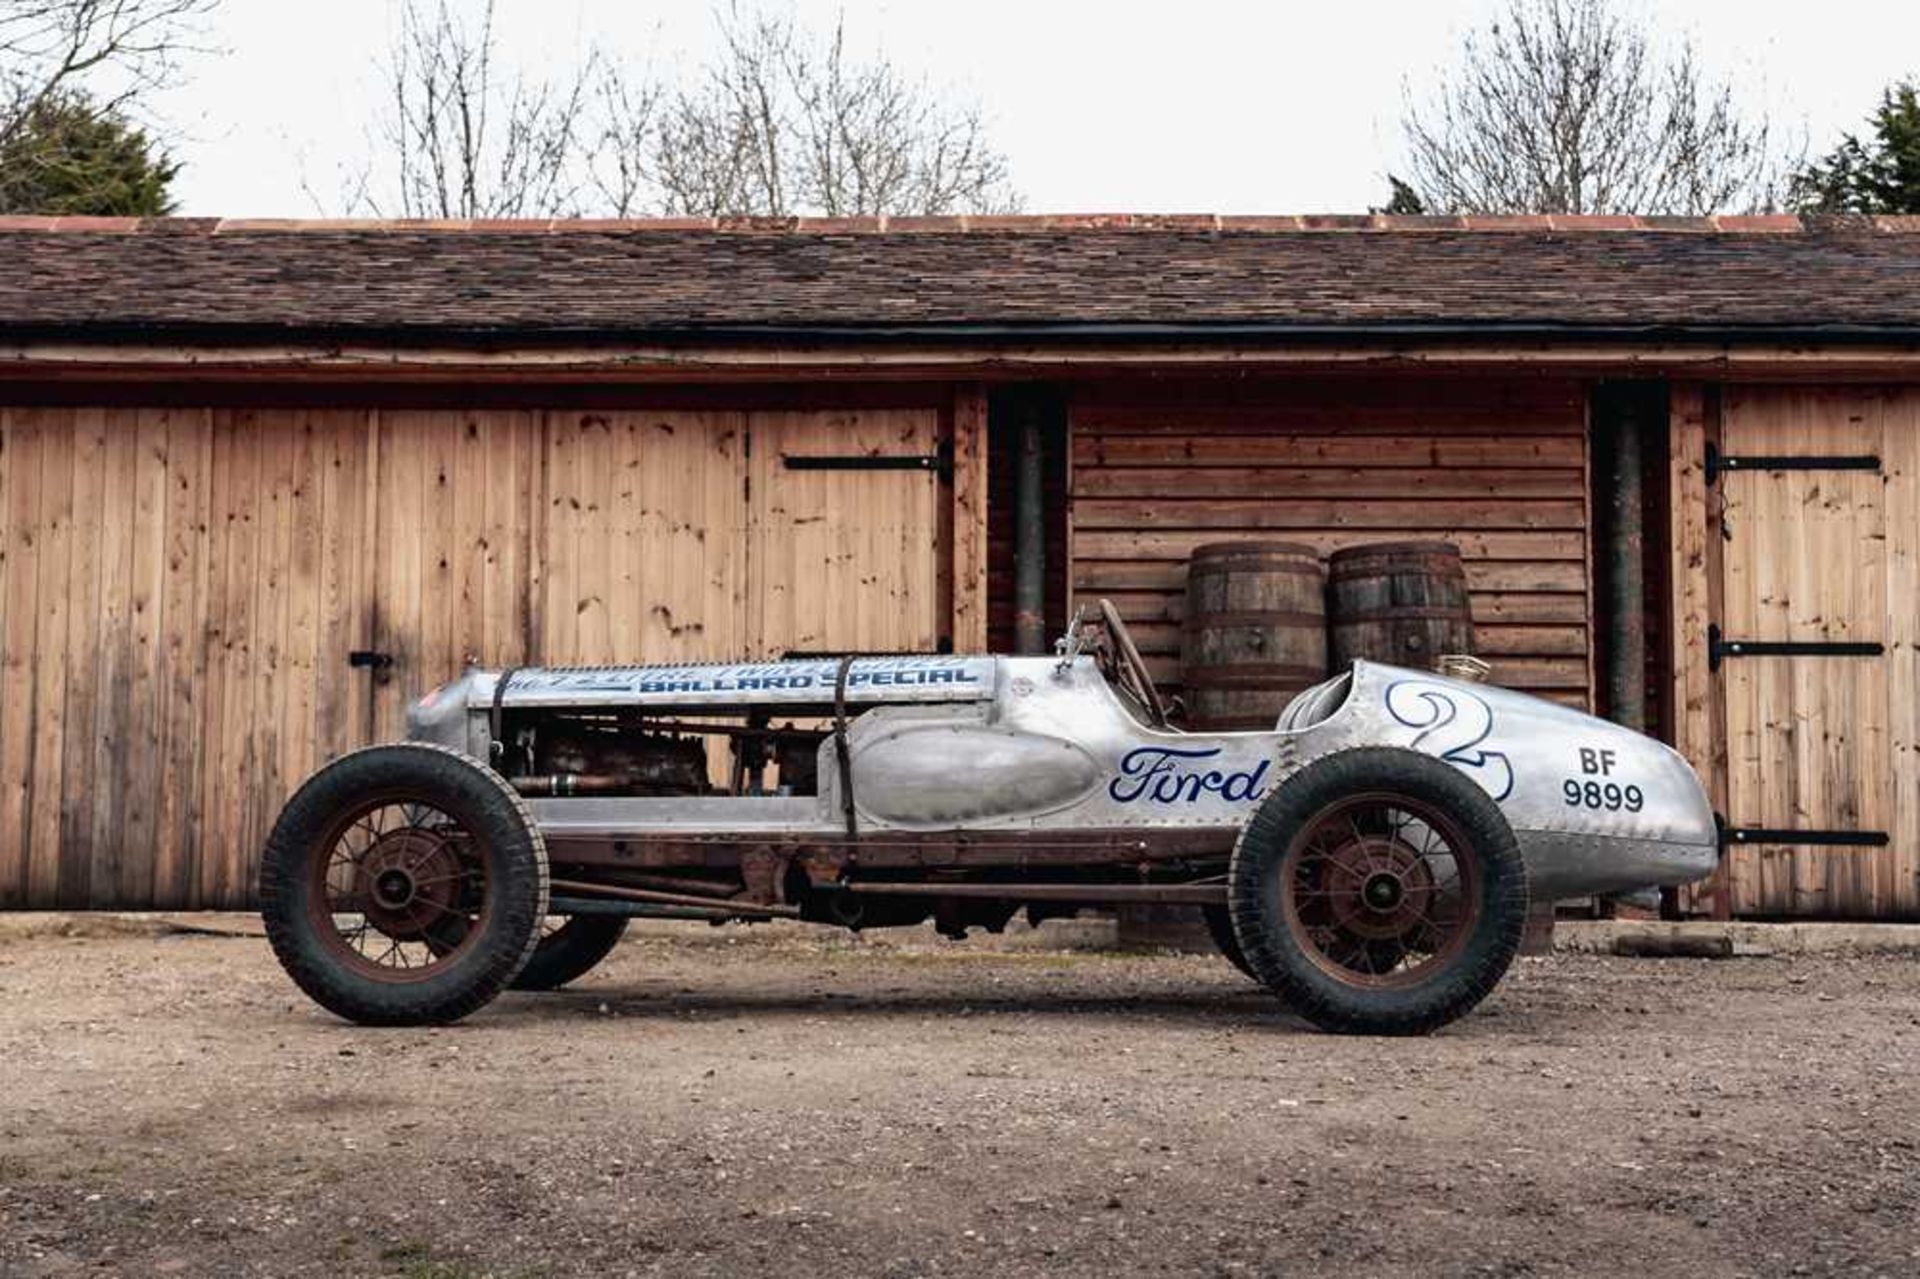 1930 Ford Model A "The Ballard Special" Speedster One off, bespoke built twin-engined pre-war racing - Image 4 of 94